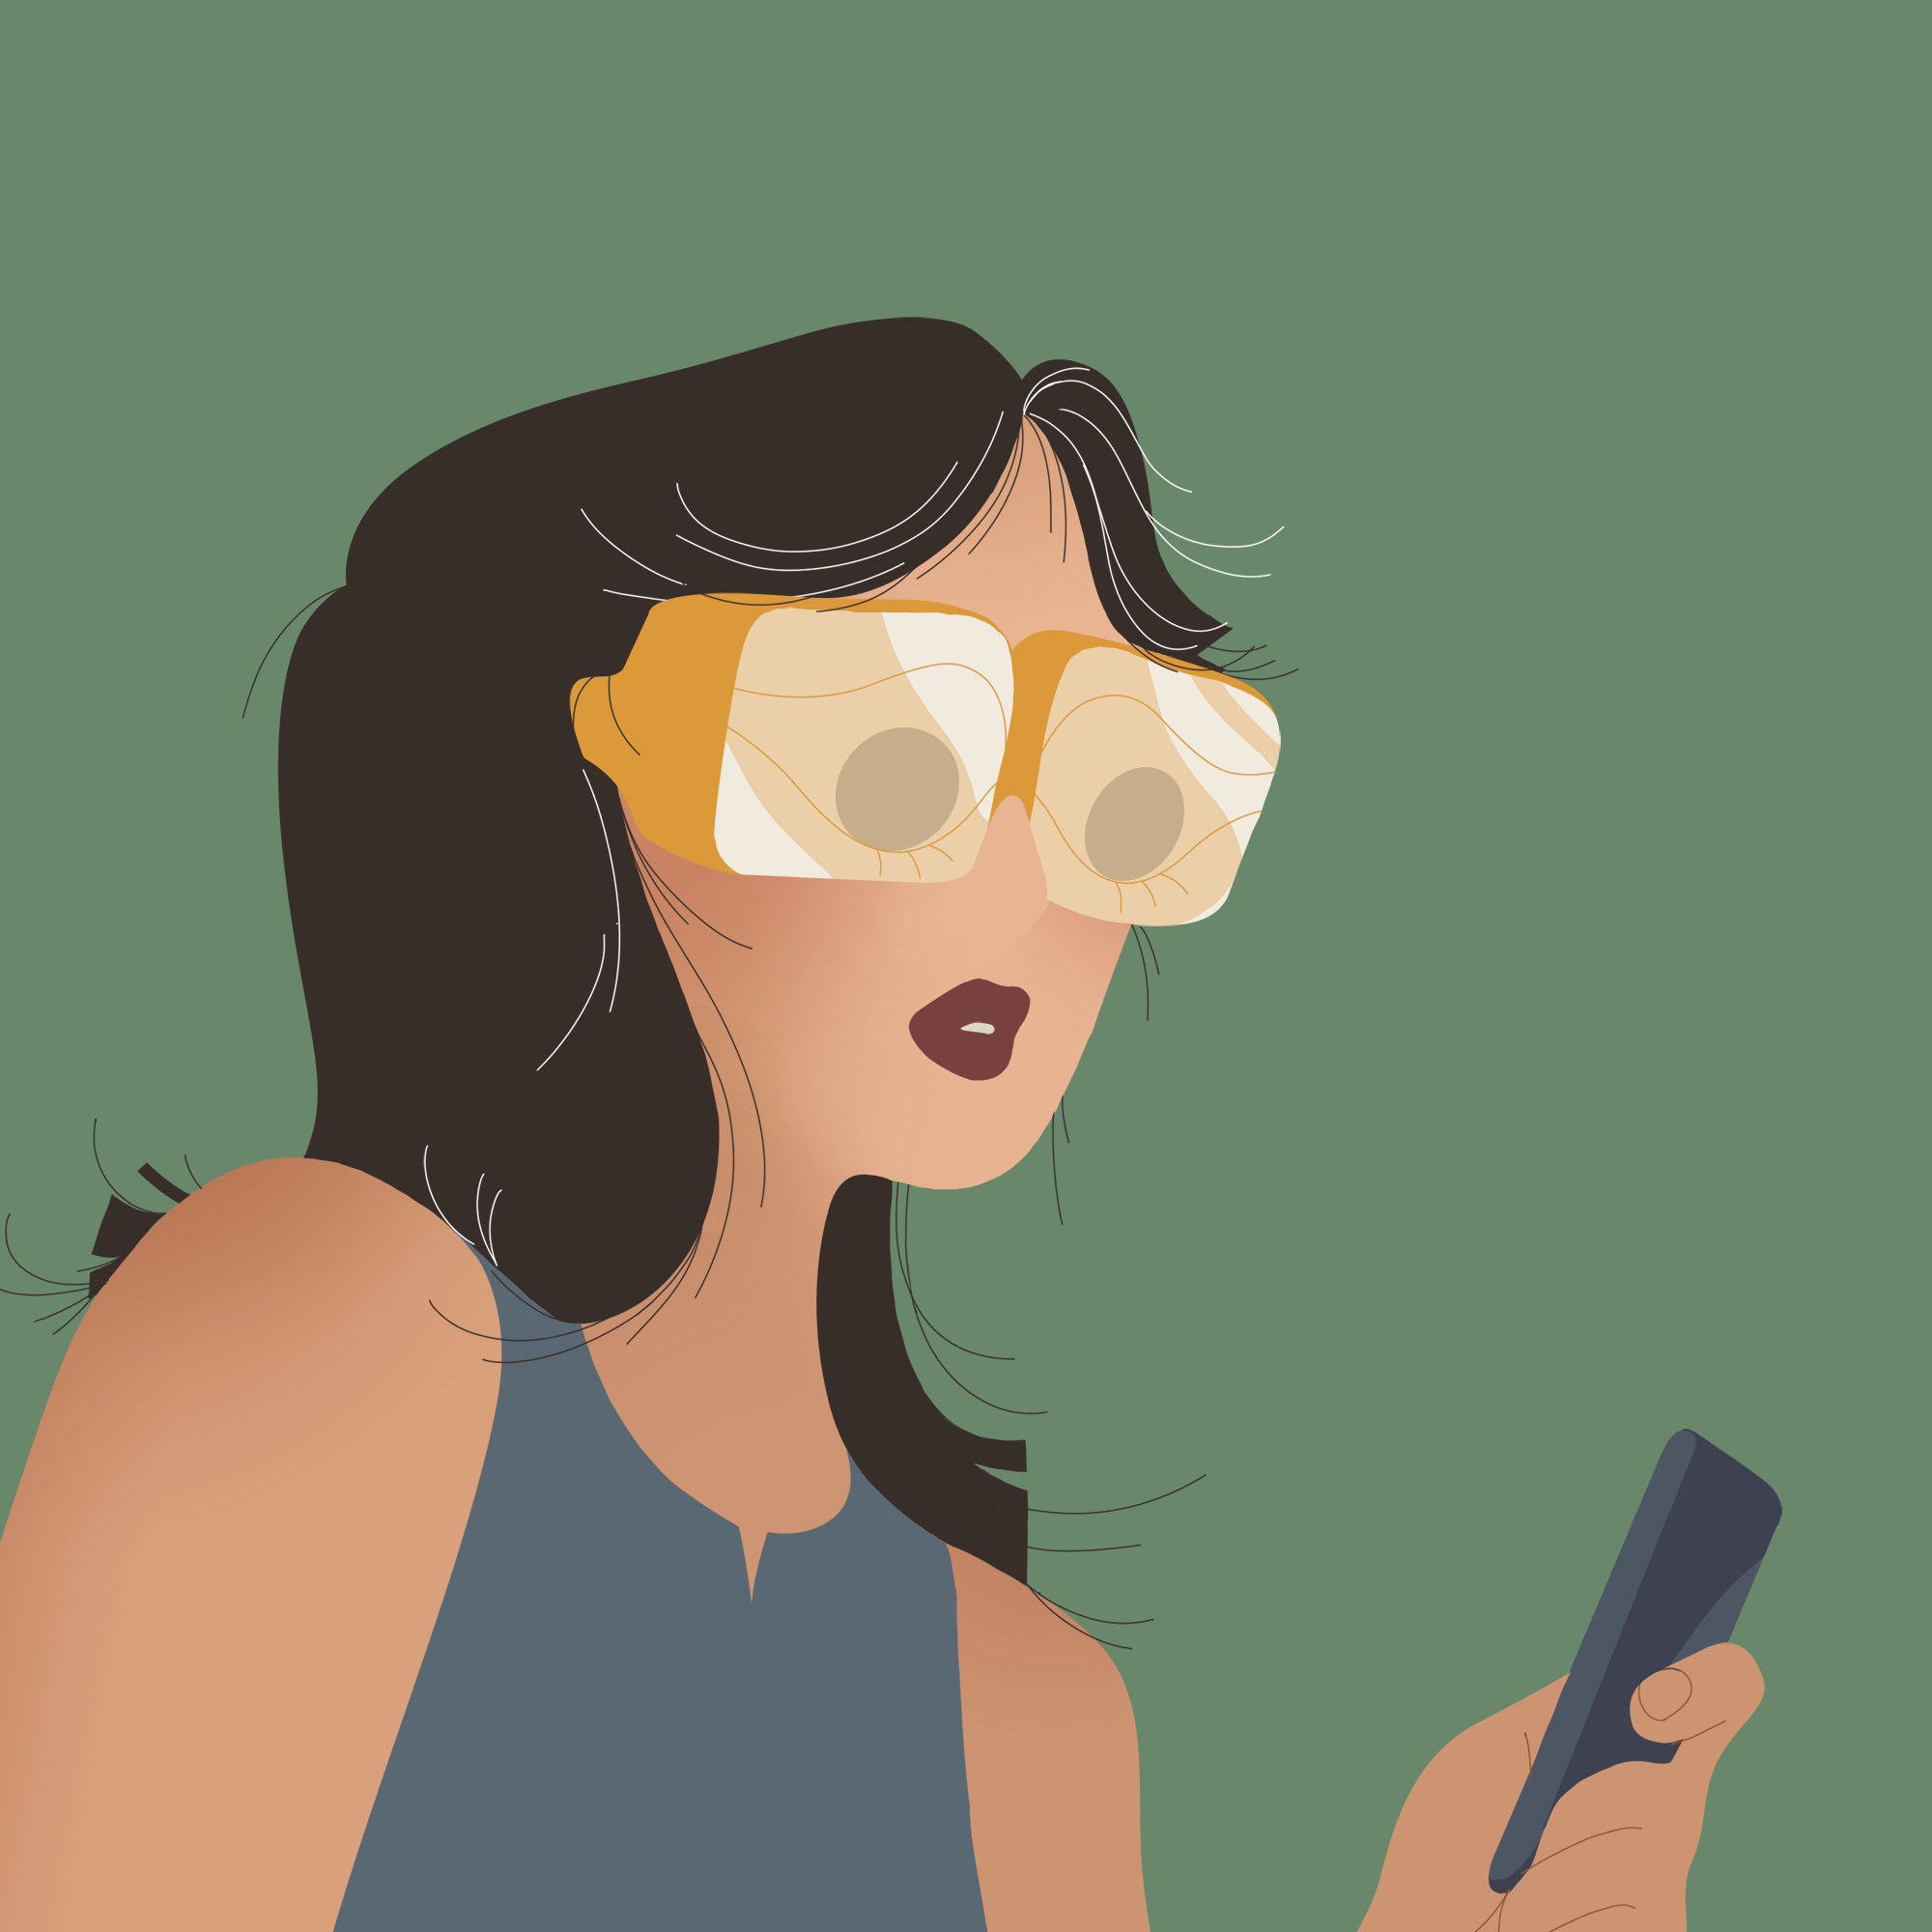 Lenses lady looking at phone illustration